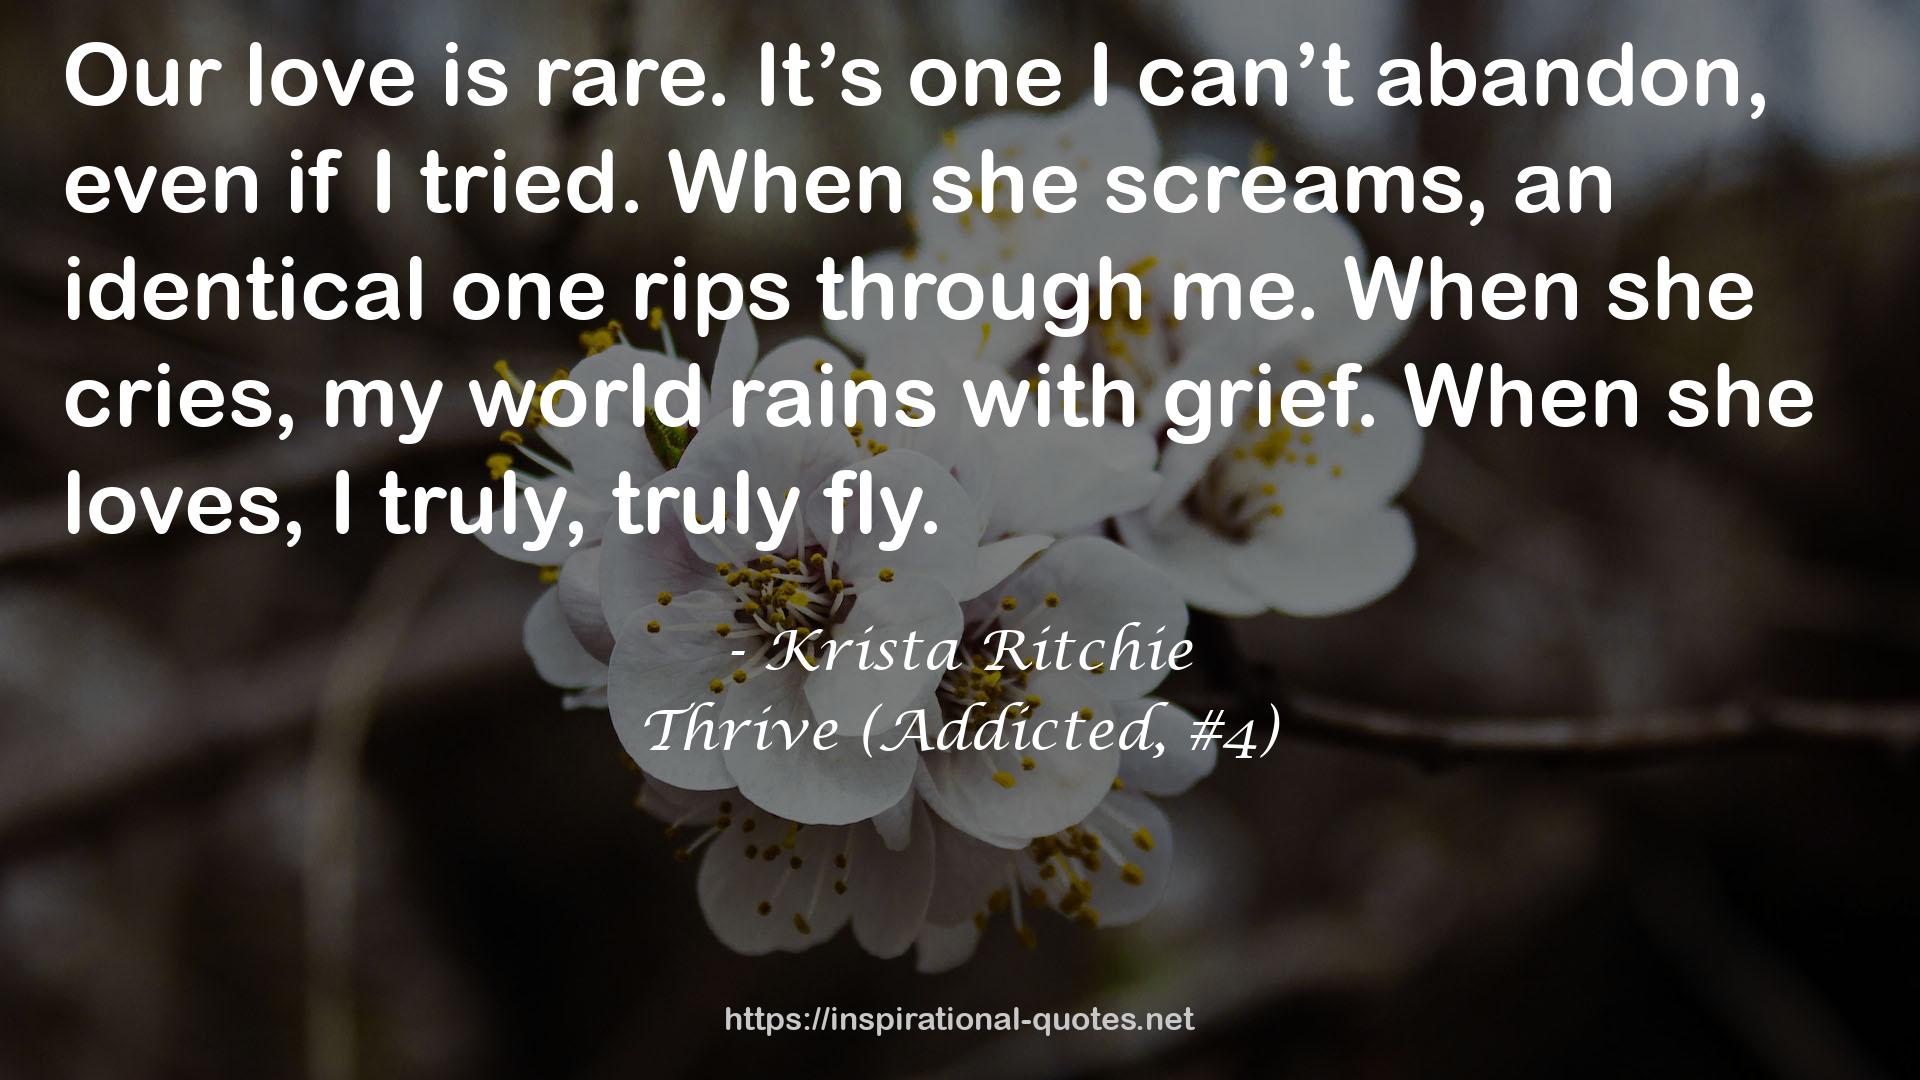 Thrive (Addicted, #4) QUOTES